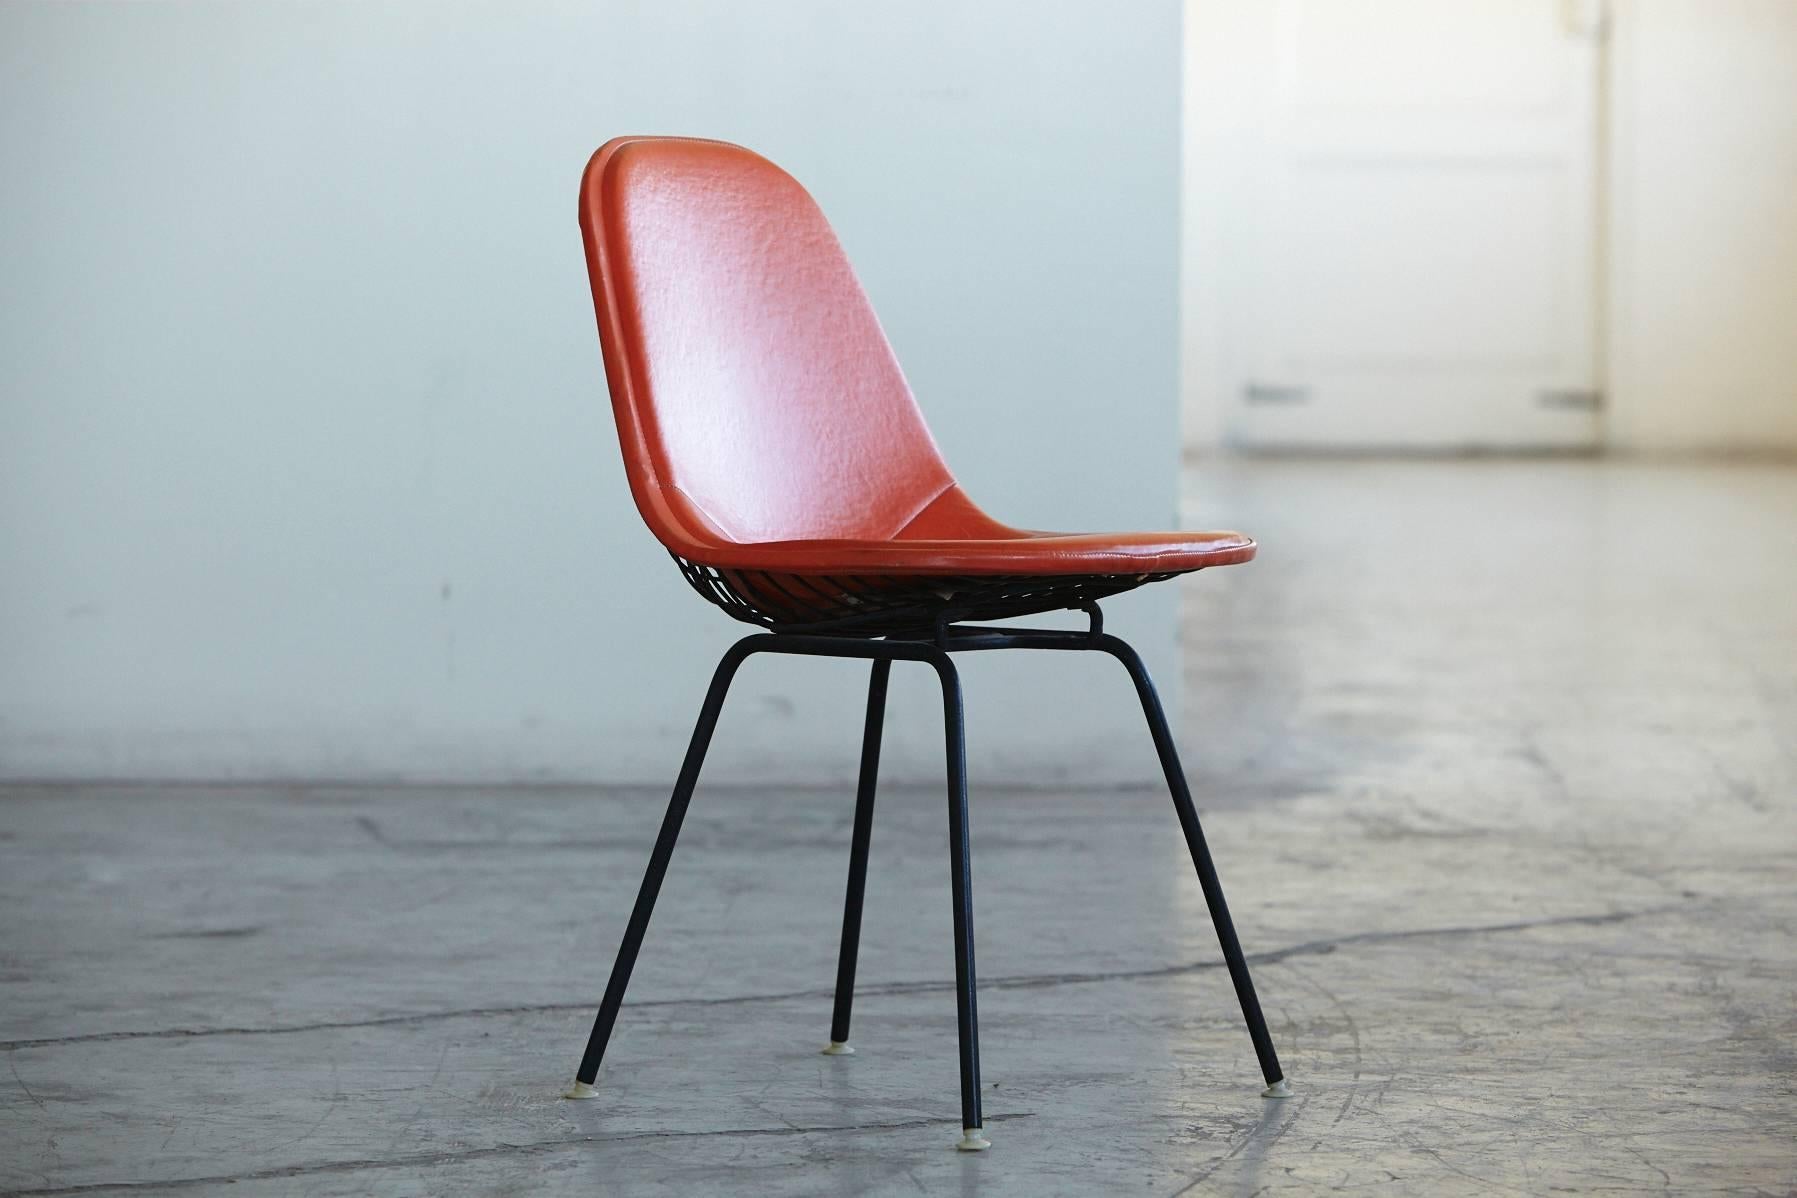 Charles and Ray Eames side chair DKX-1 in orange leather for Herman Miller, circa 1960s.
The chair is in very good vintage condition, no damage to the leather, very solid chair.